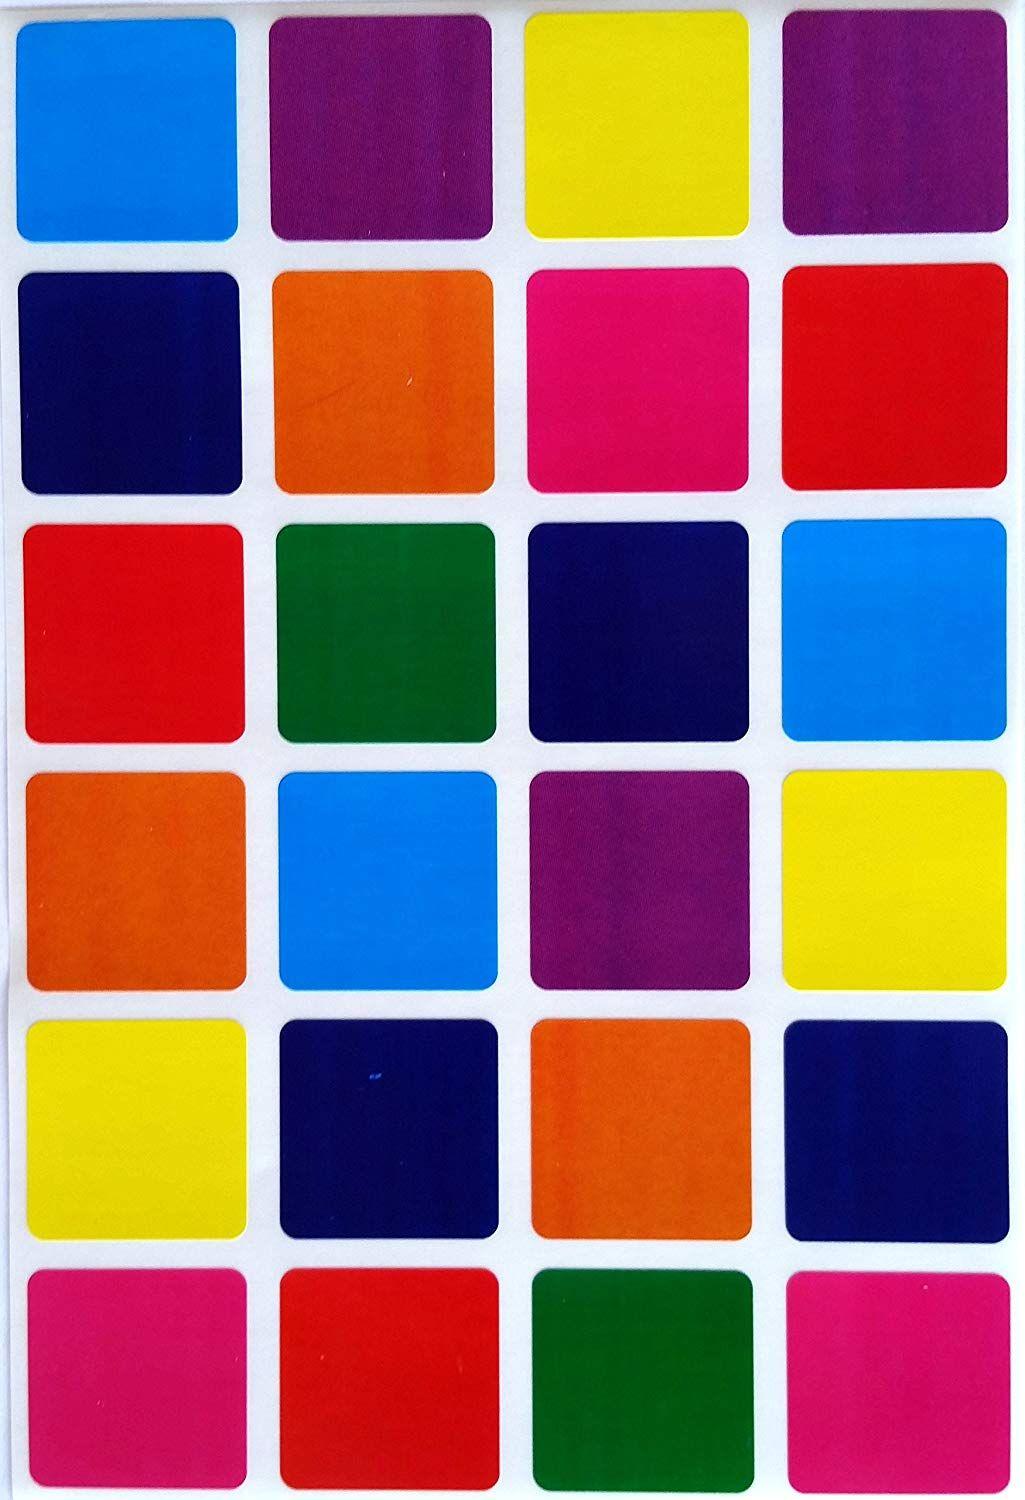 Purple Blue Red Rectangle Logo - Amazon.com : Square Color Coding Labels 1 by 1 inch- assorted colors